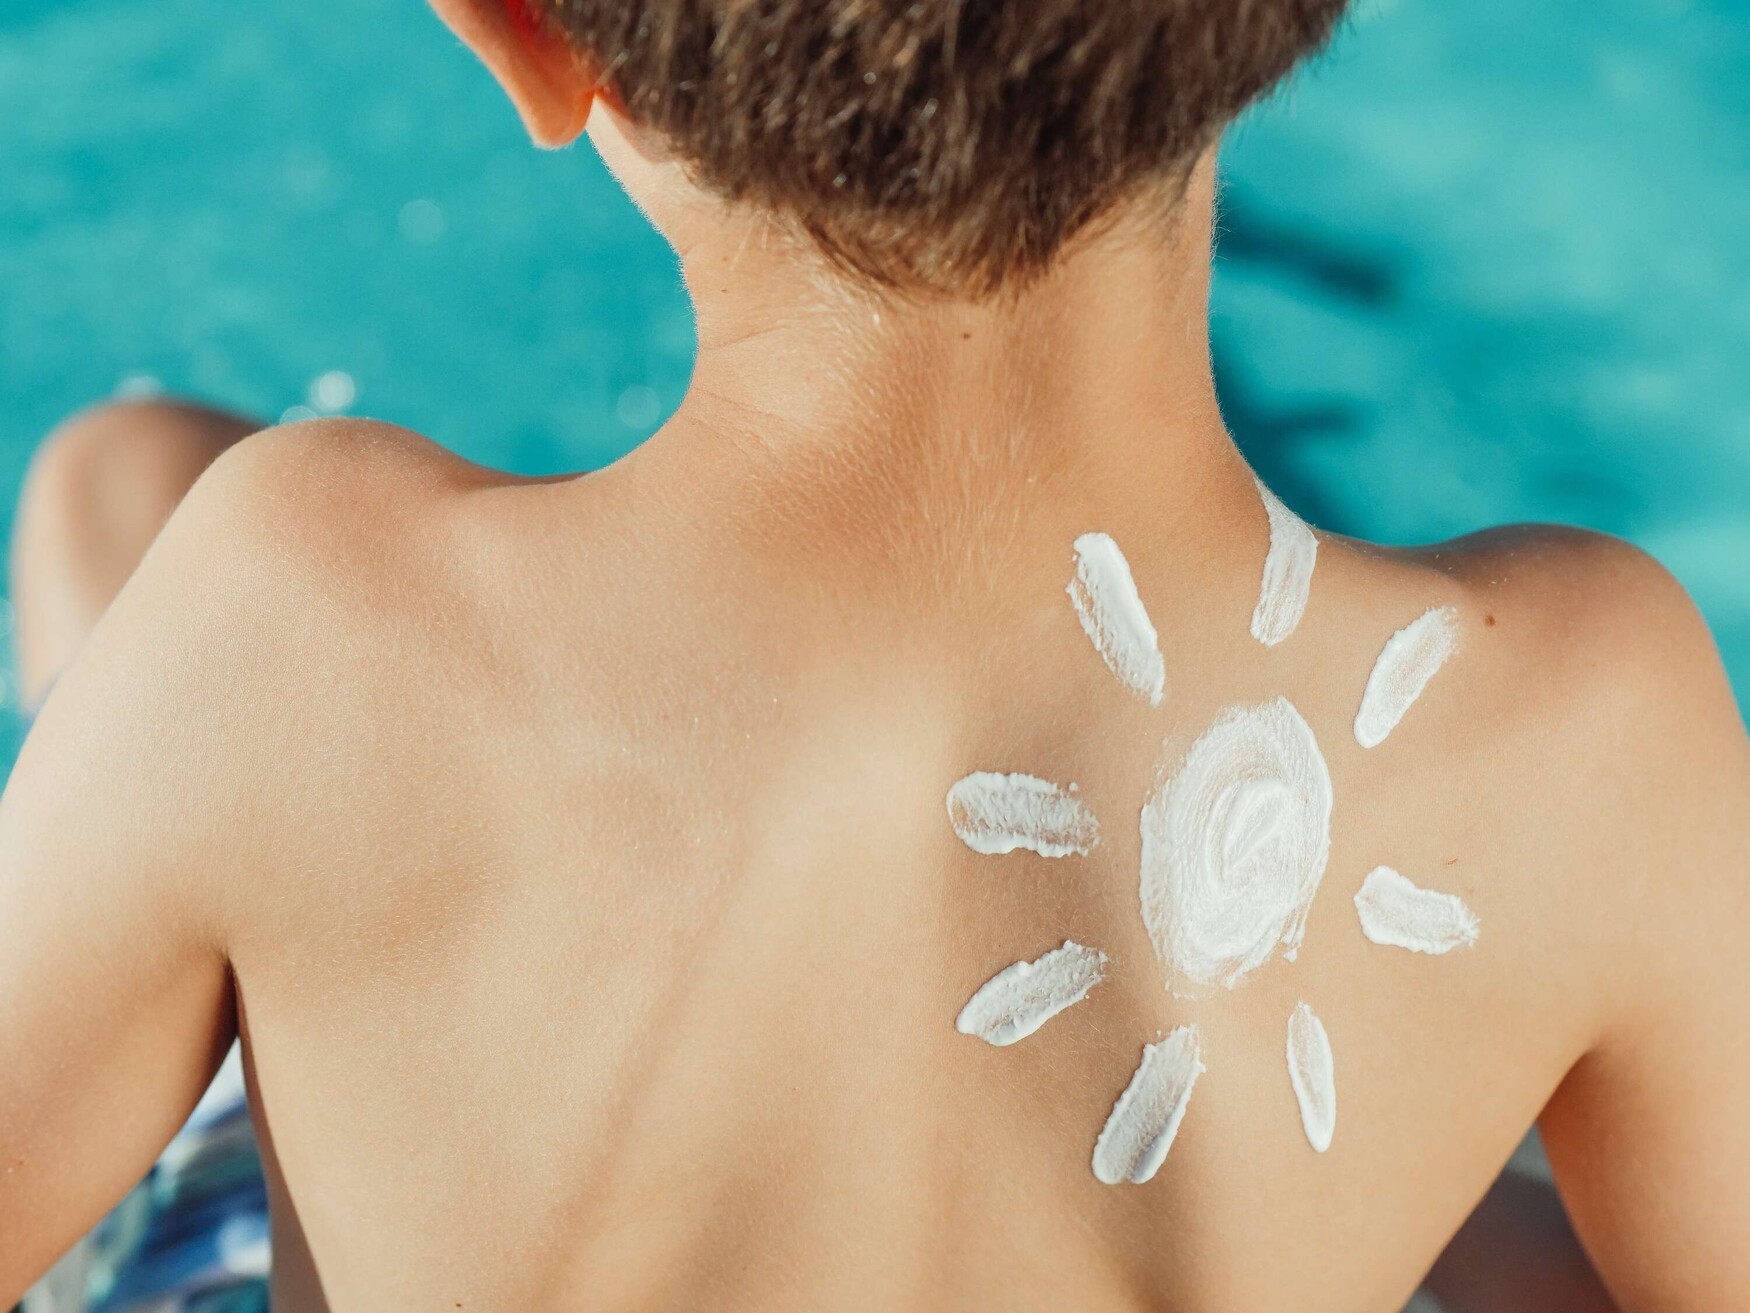 Photo of the back of a light skinned boy beside a pool with a sun sketched on his shoulder in white sunscreen. Photo by Kindel Media from Pexels